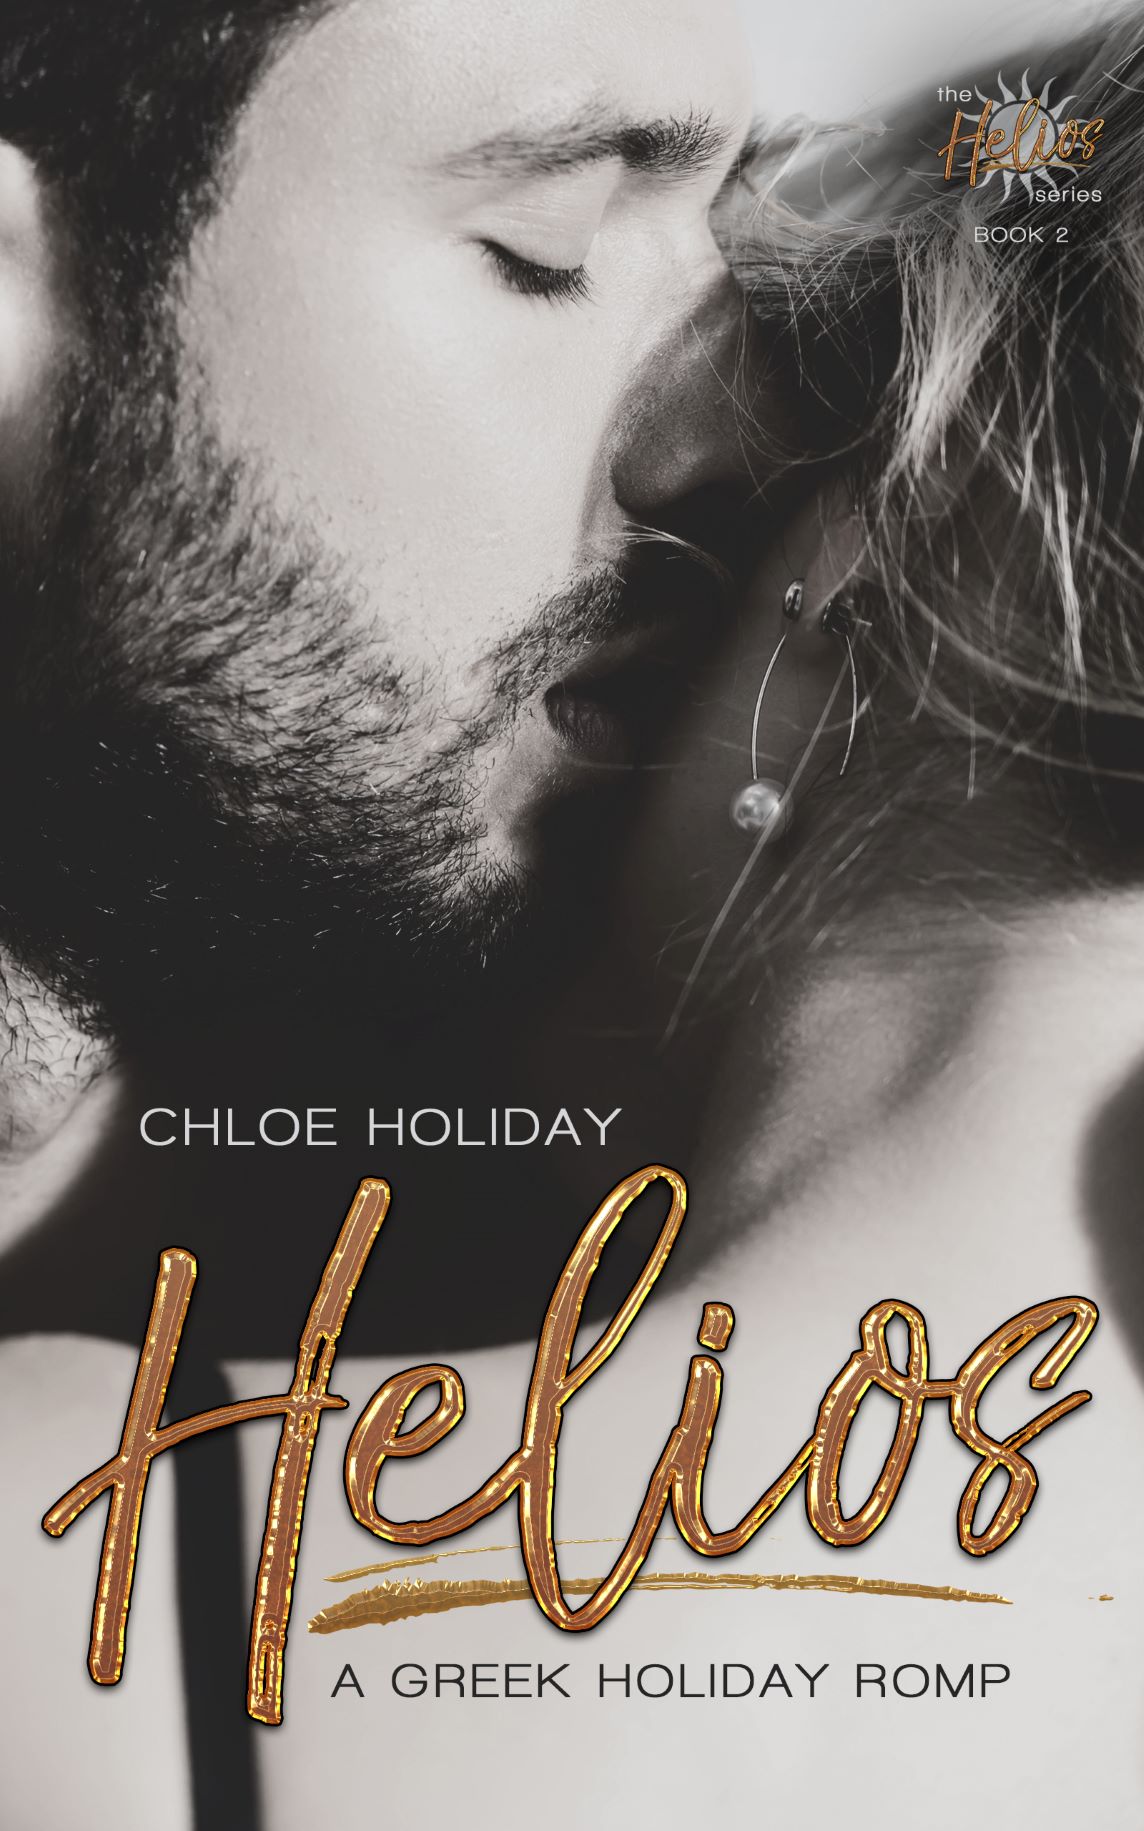 A new cover for Helios by Chloe Holiday.